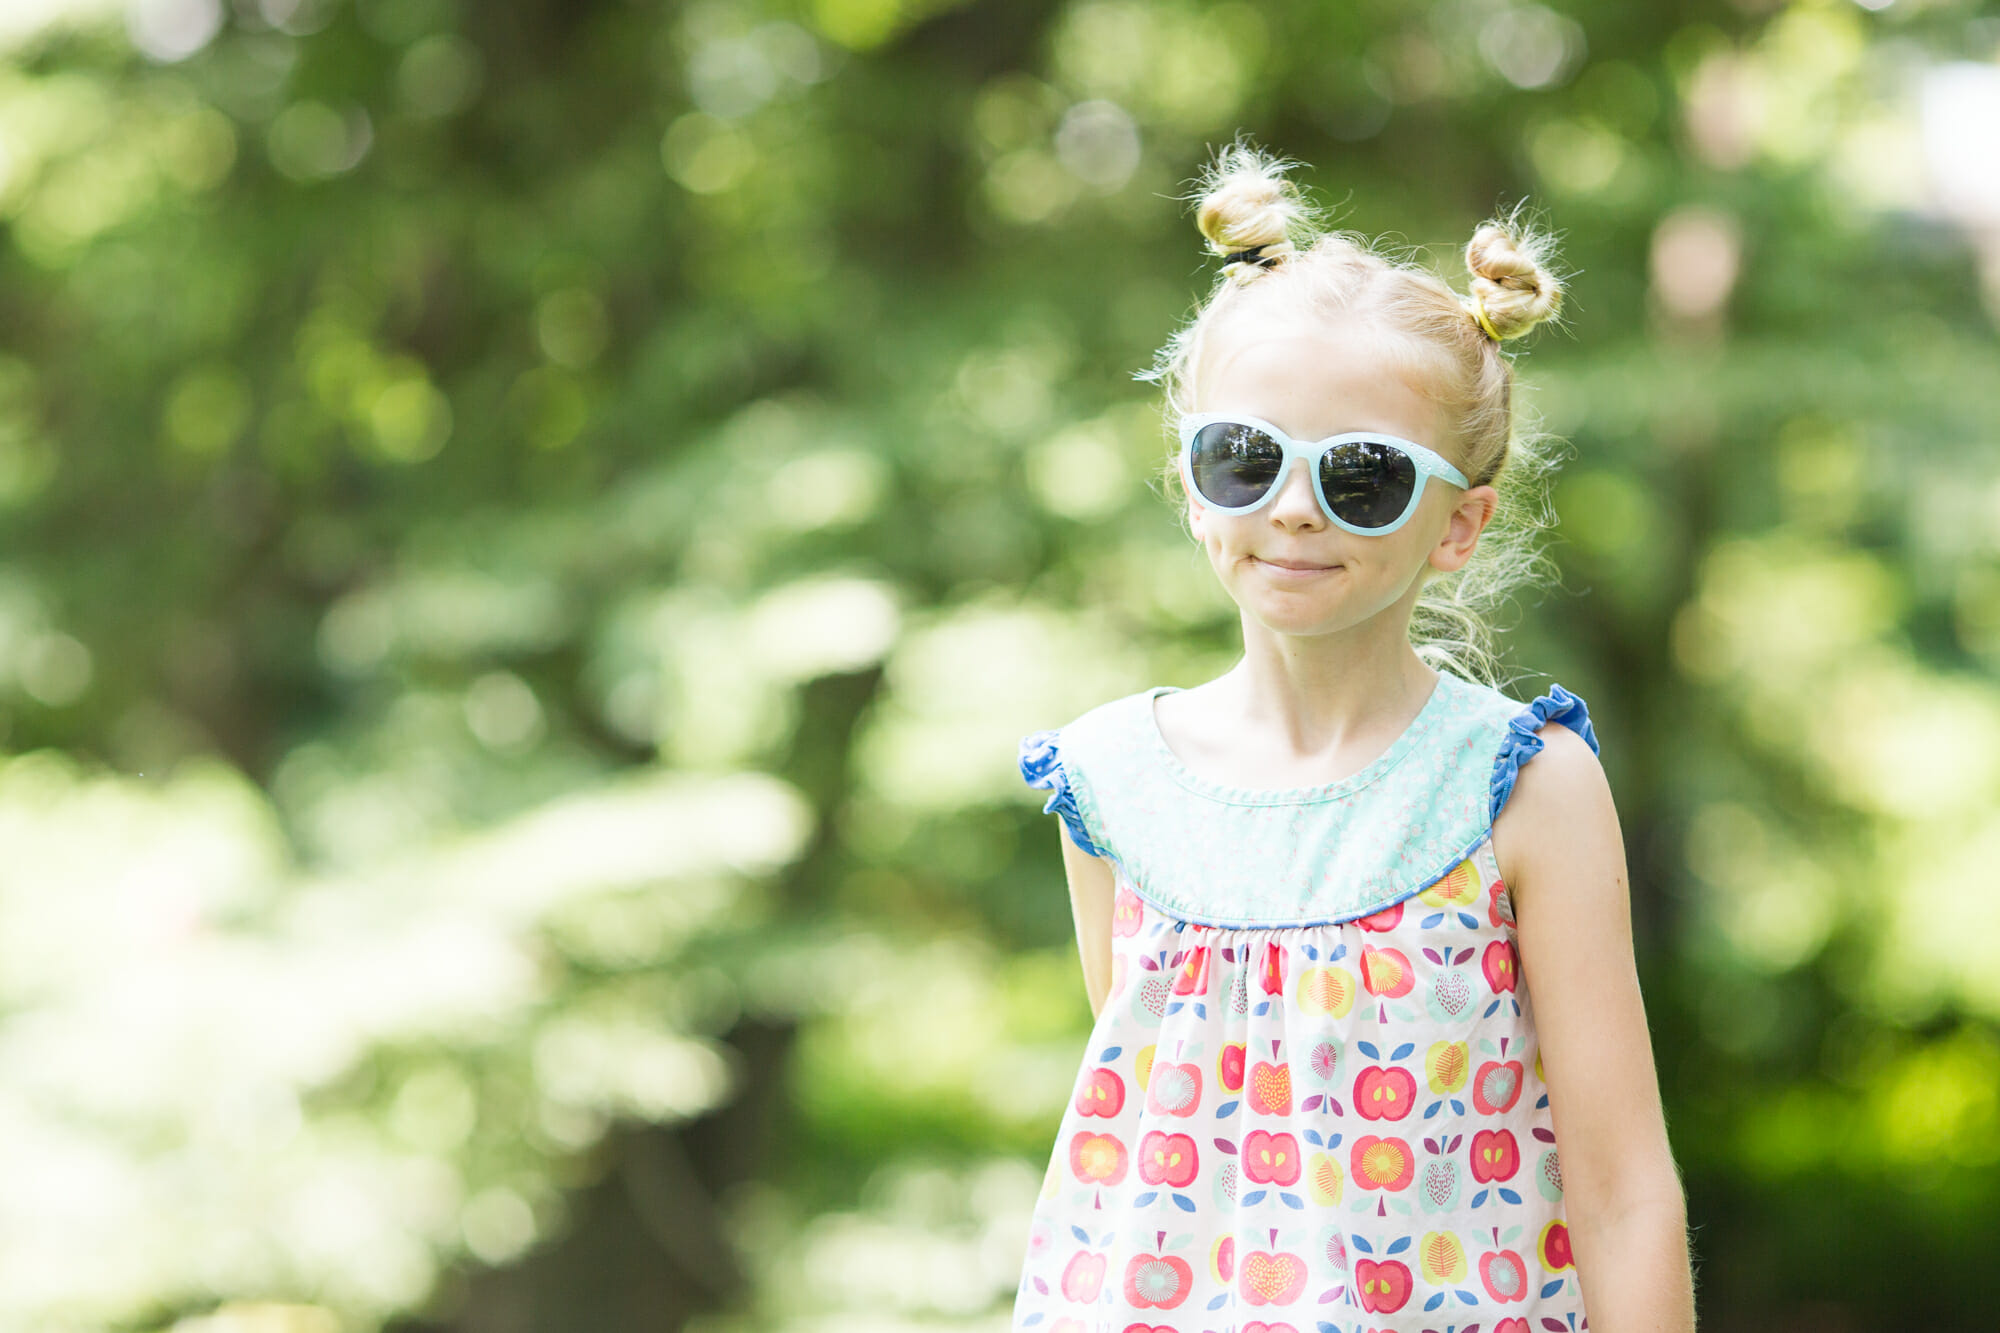 A portrait of a girl in a park with sunglasses